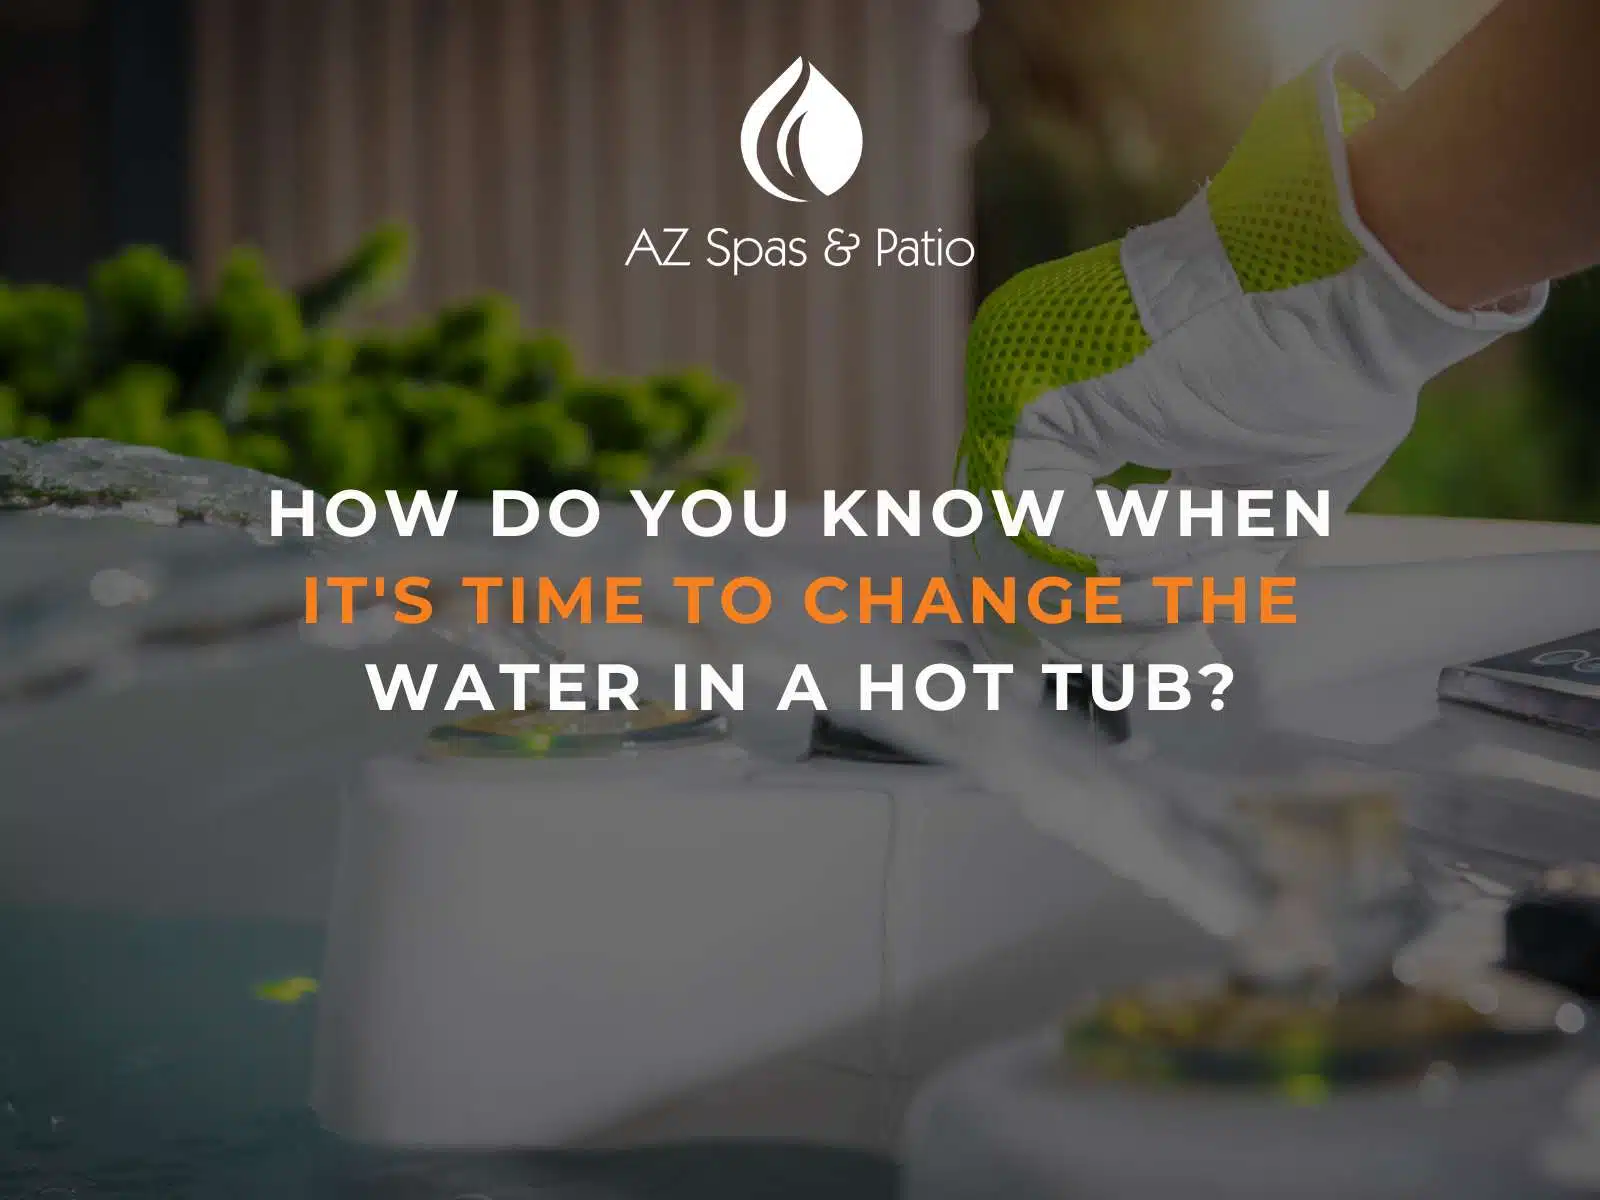 How Do You Know When It's Time To Change The Water In a Hot Tub?